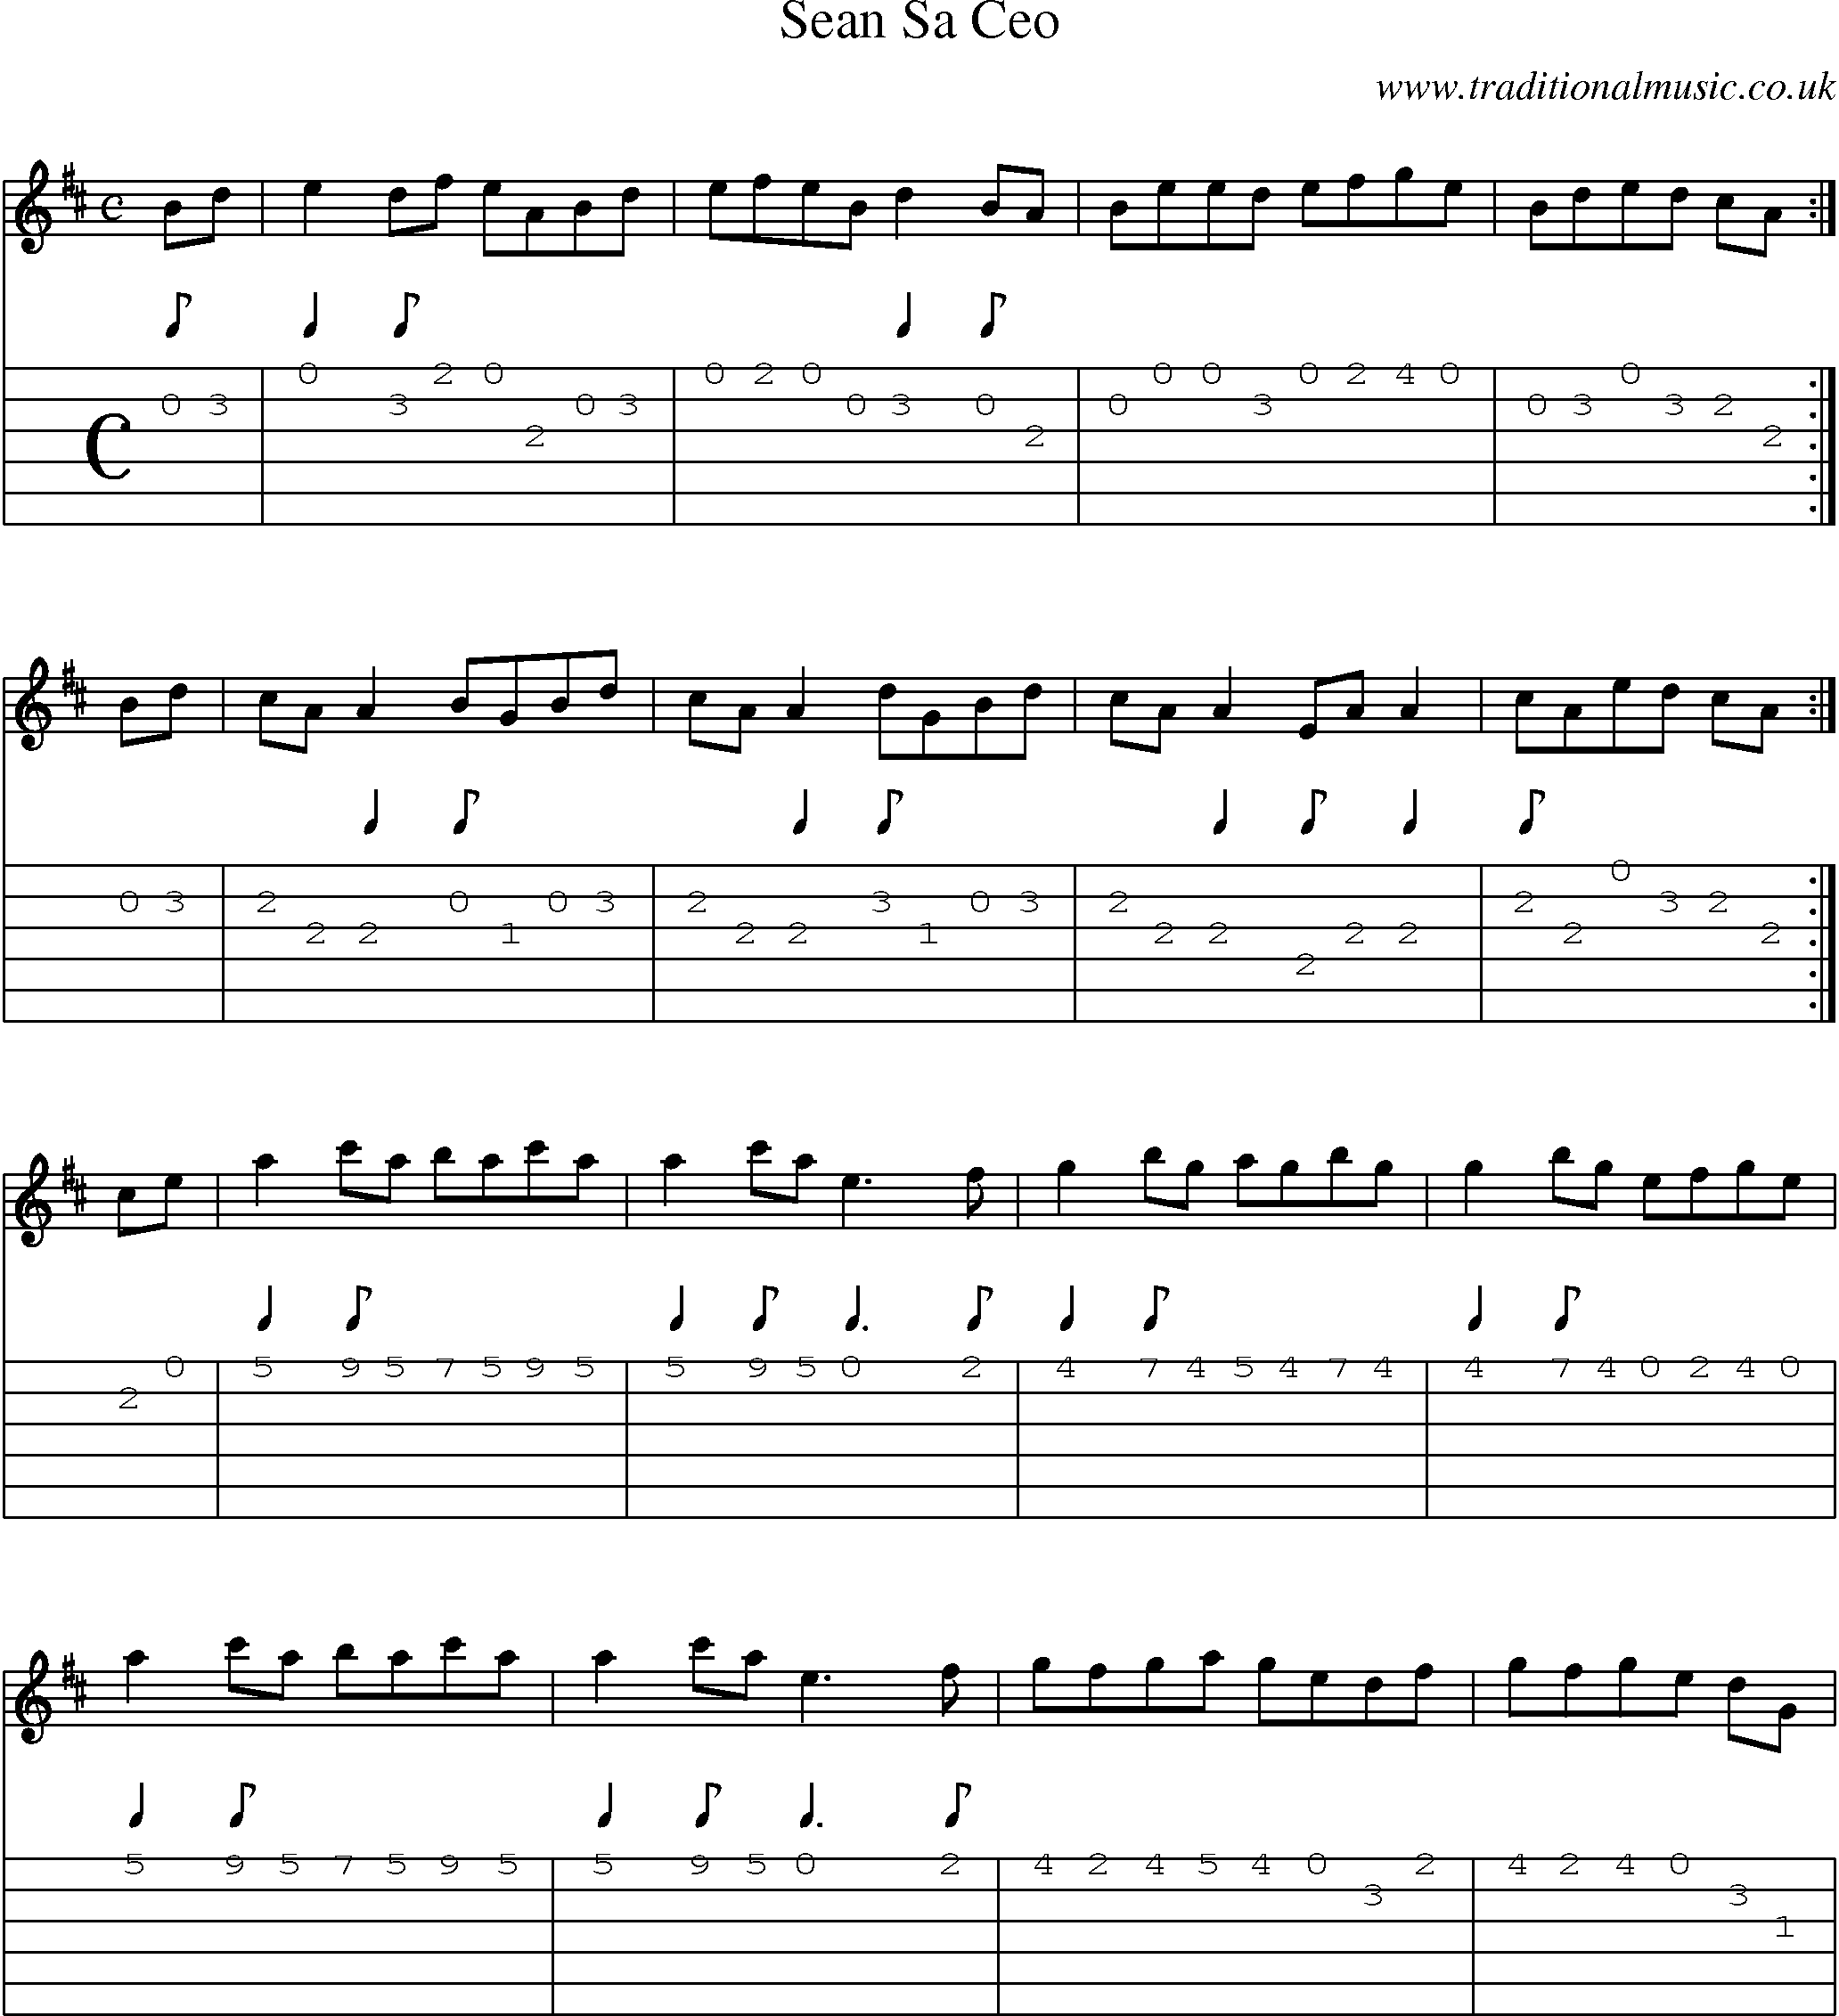 Music Score and Guitar Tabs for Sean Sa Ceo